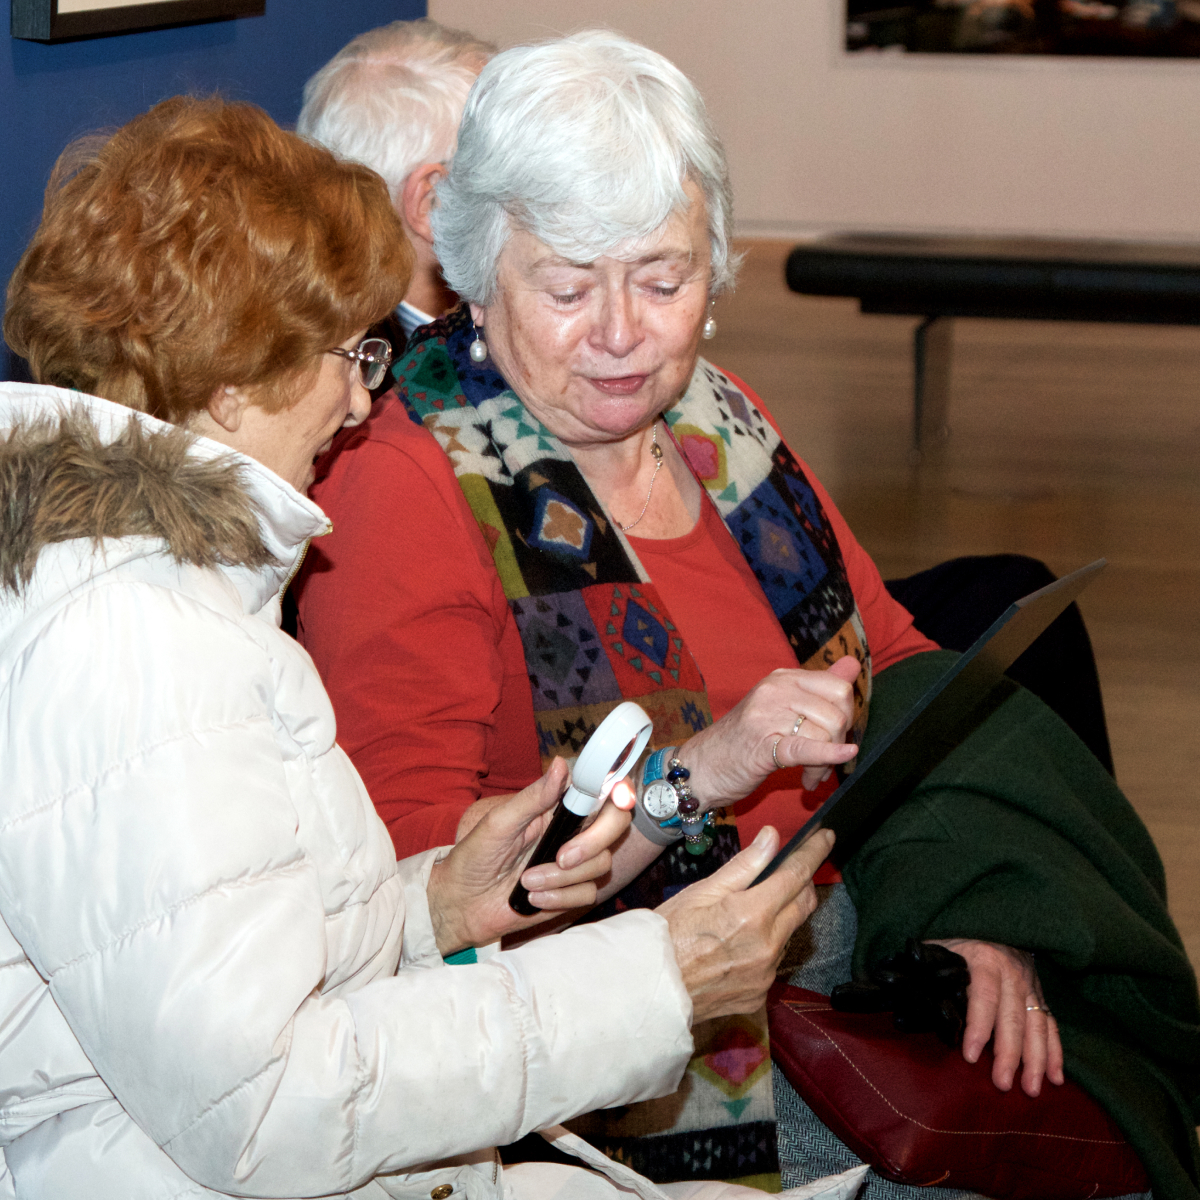 Two members of the Henshaws Group explore colour copies of artworks at a described tour of an exhibition at Gallery Oldham